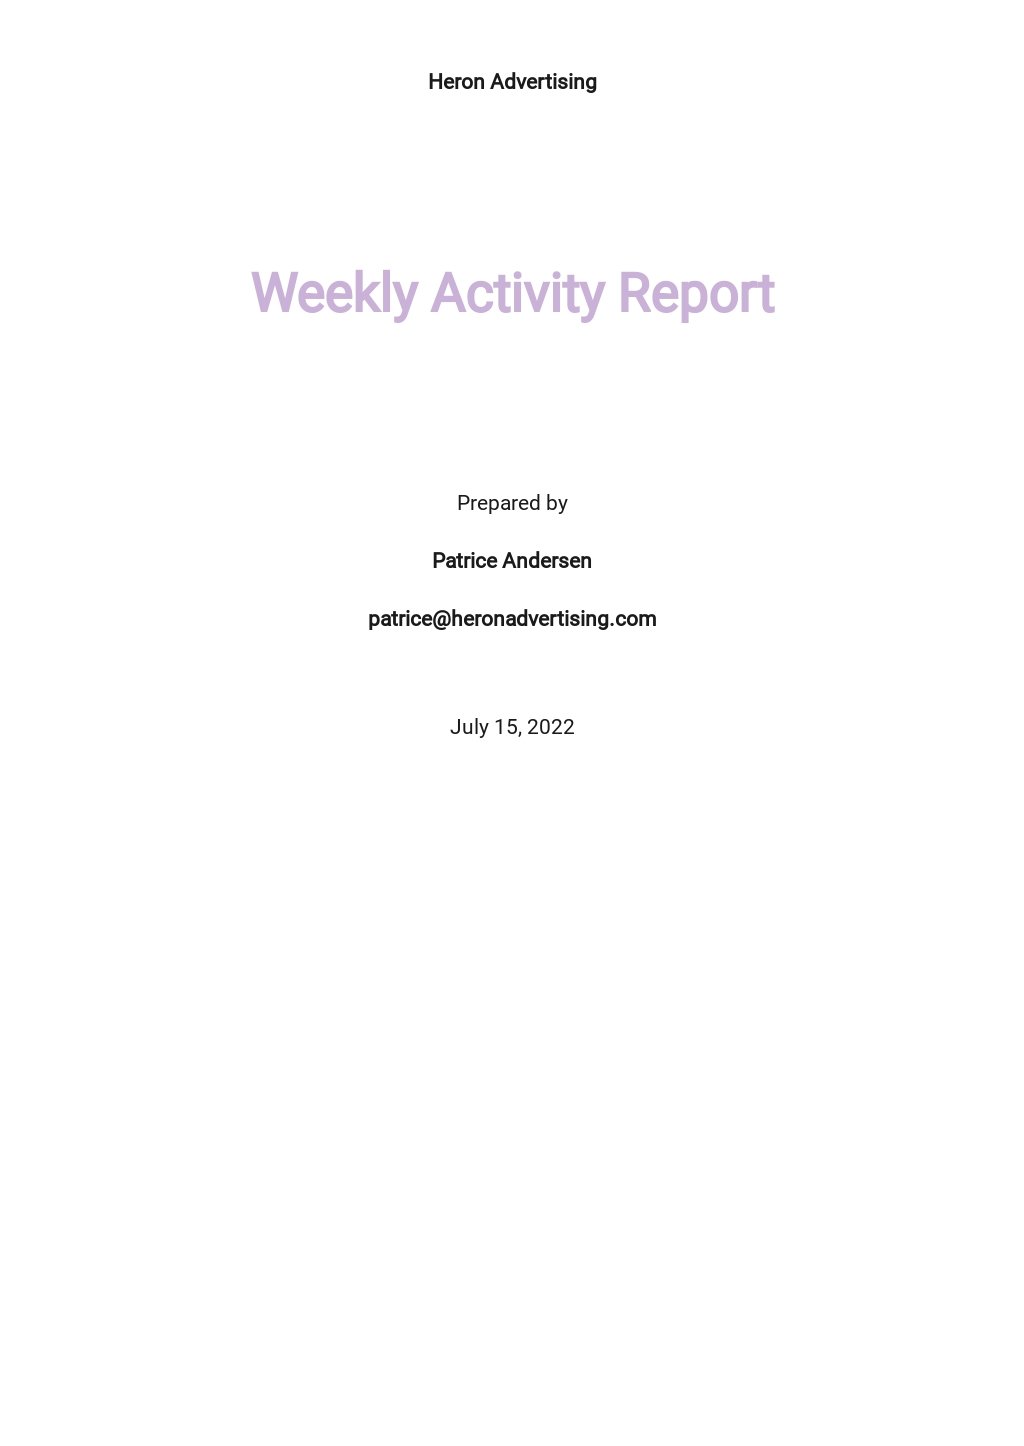 Free Sample Weekly Activity Report Template.jpe